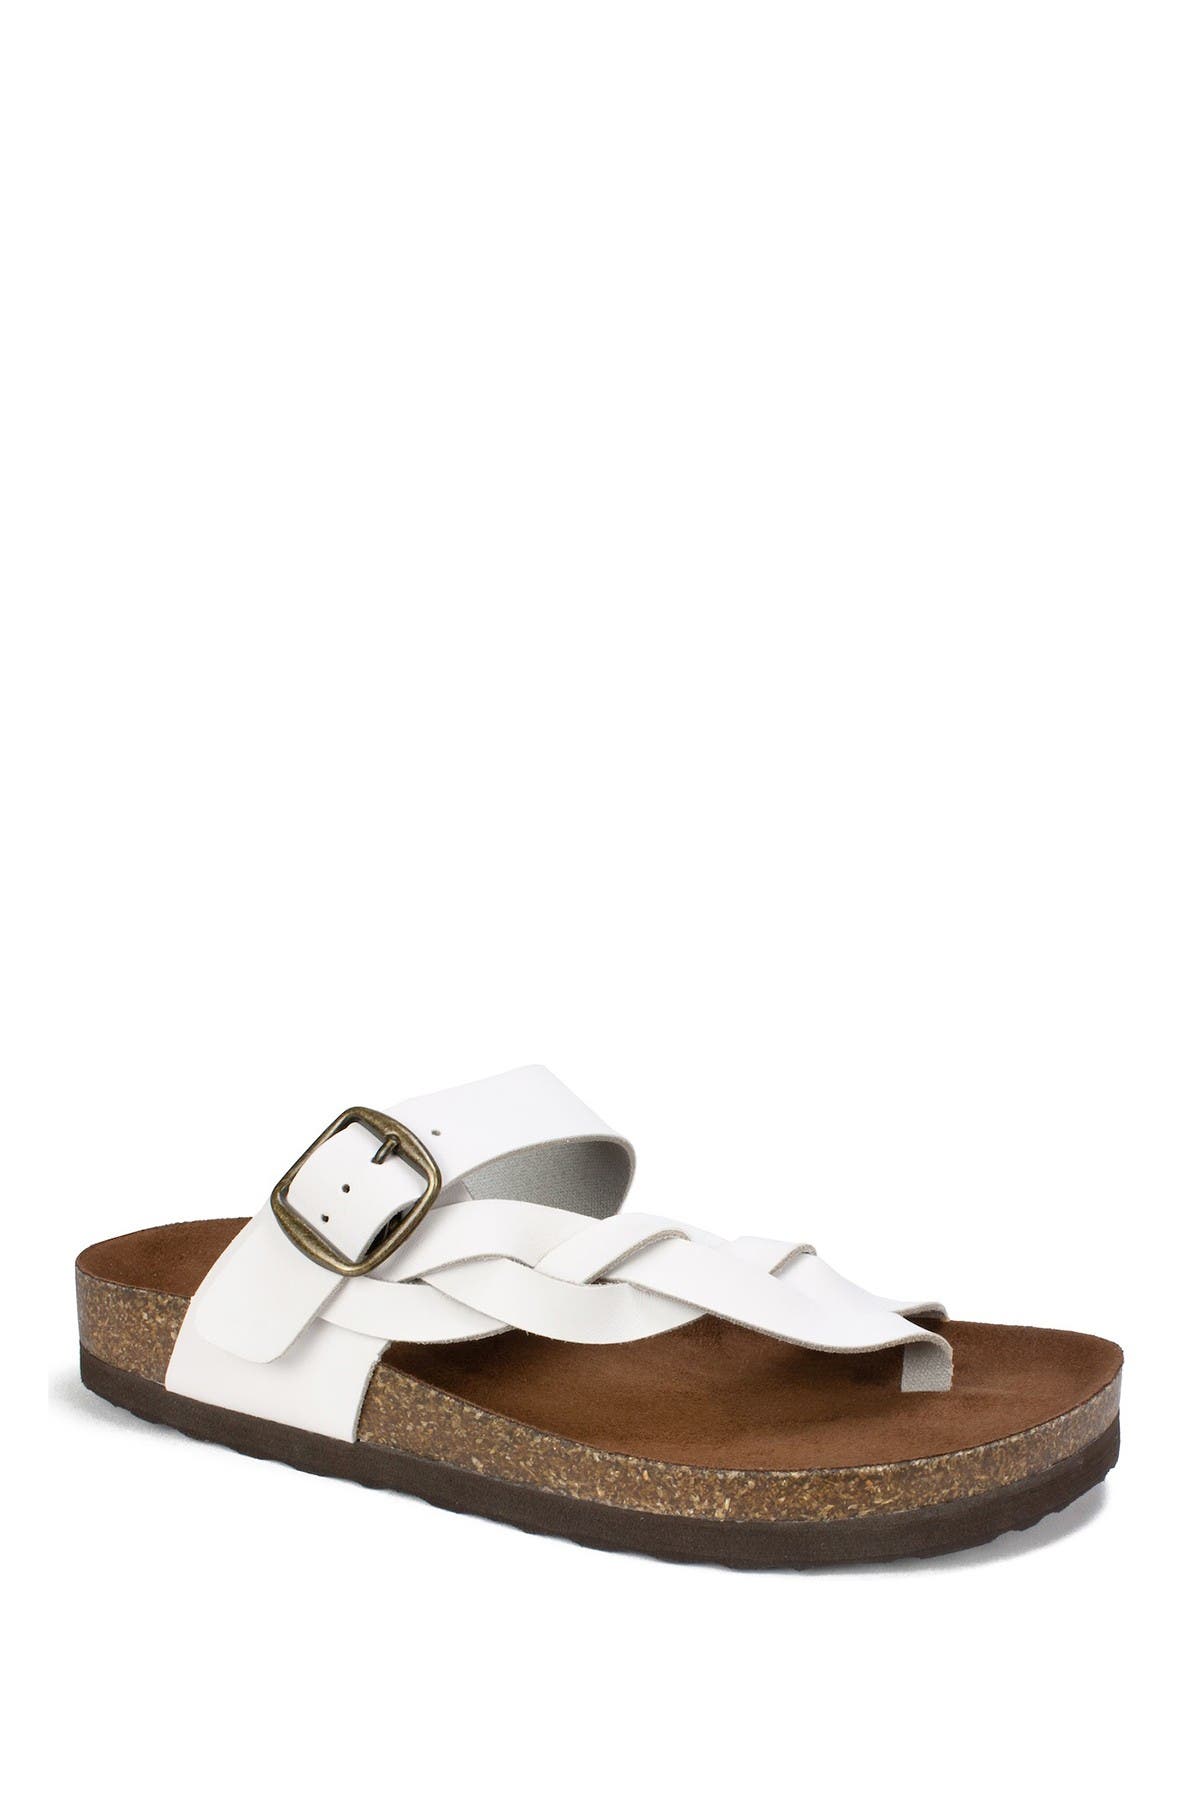 White Mountain Footwear Crawford Braided Footbed Sandal In White/leather